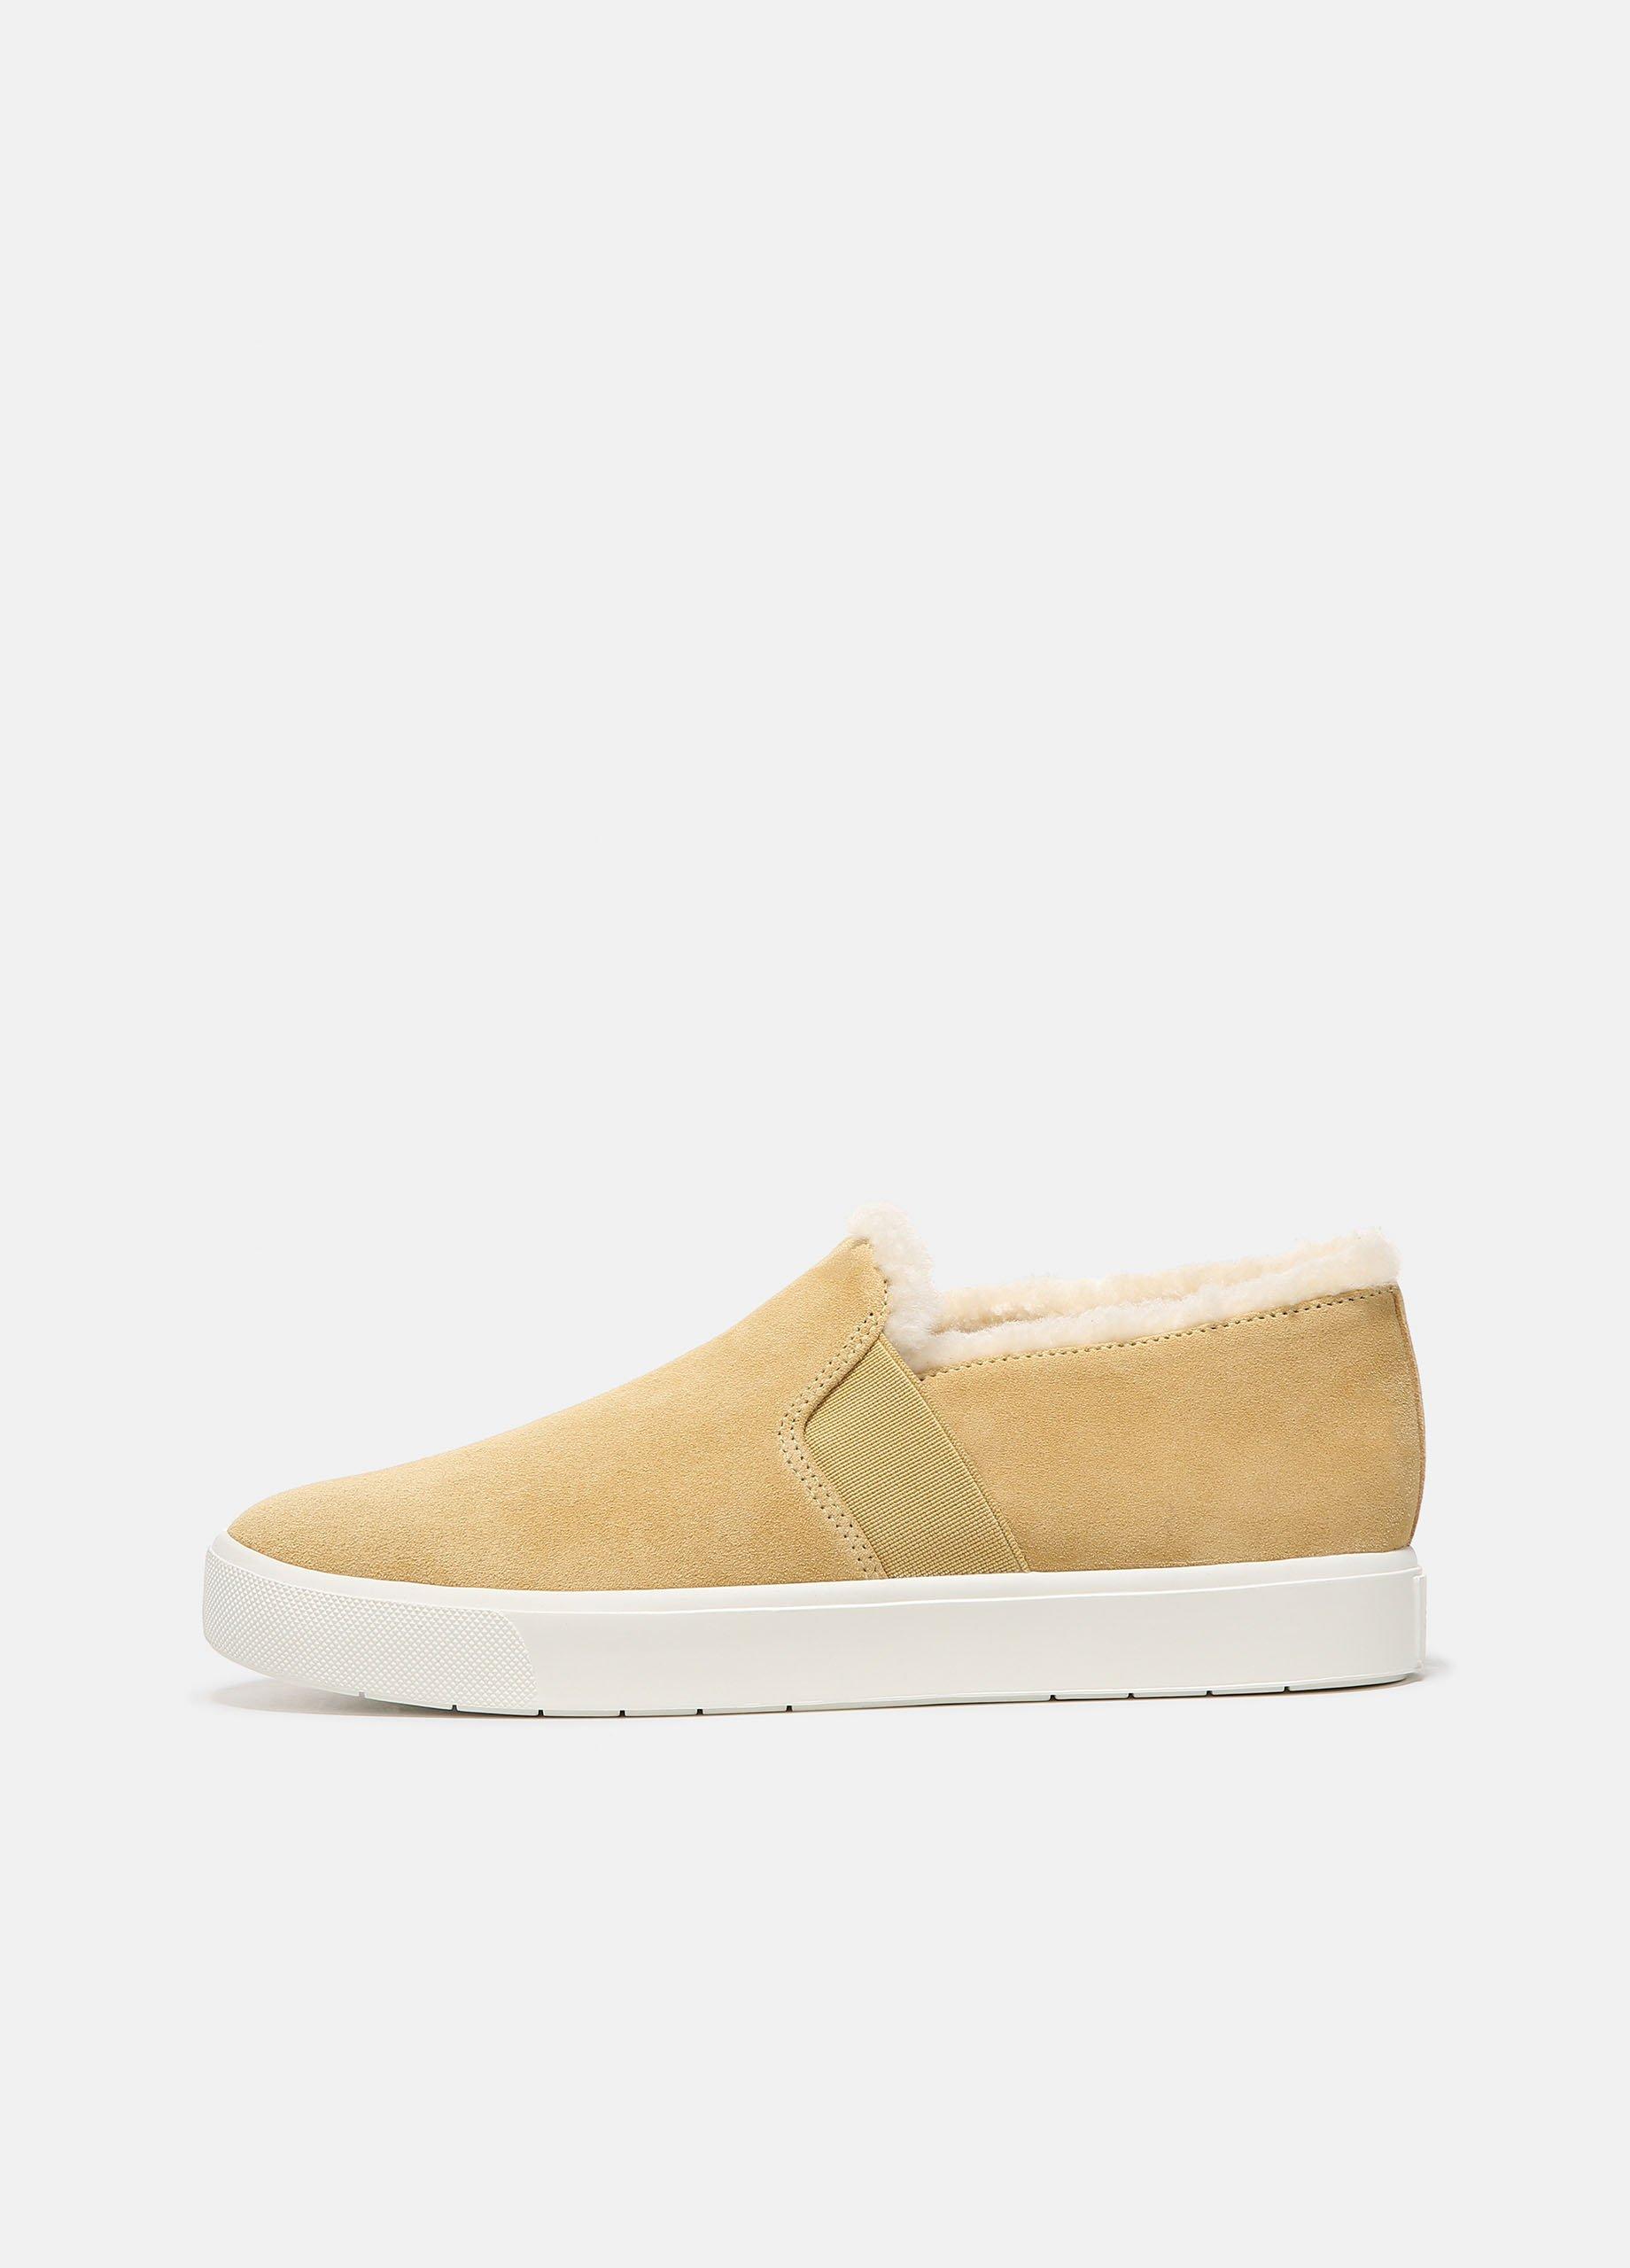 Blair Shearling-Lined Sneaker in Shoes | Vince